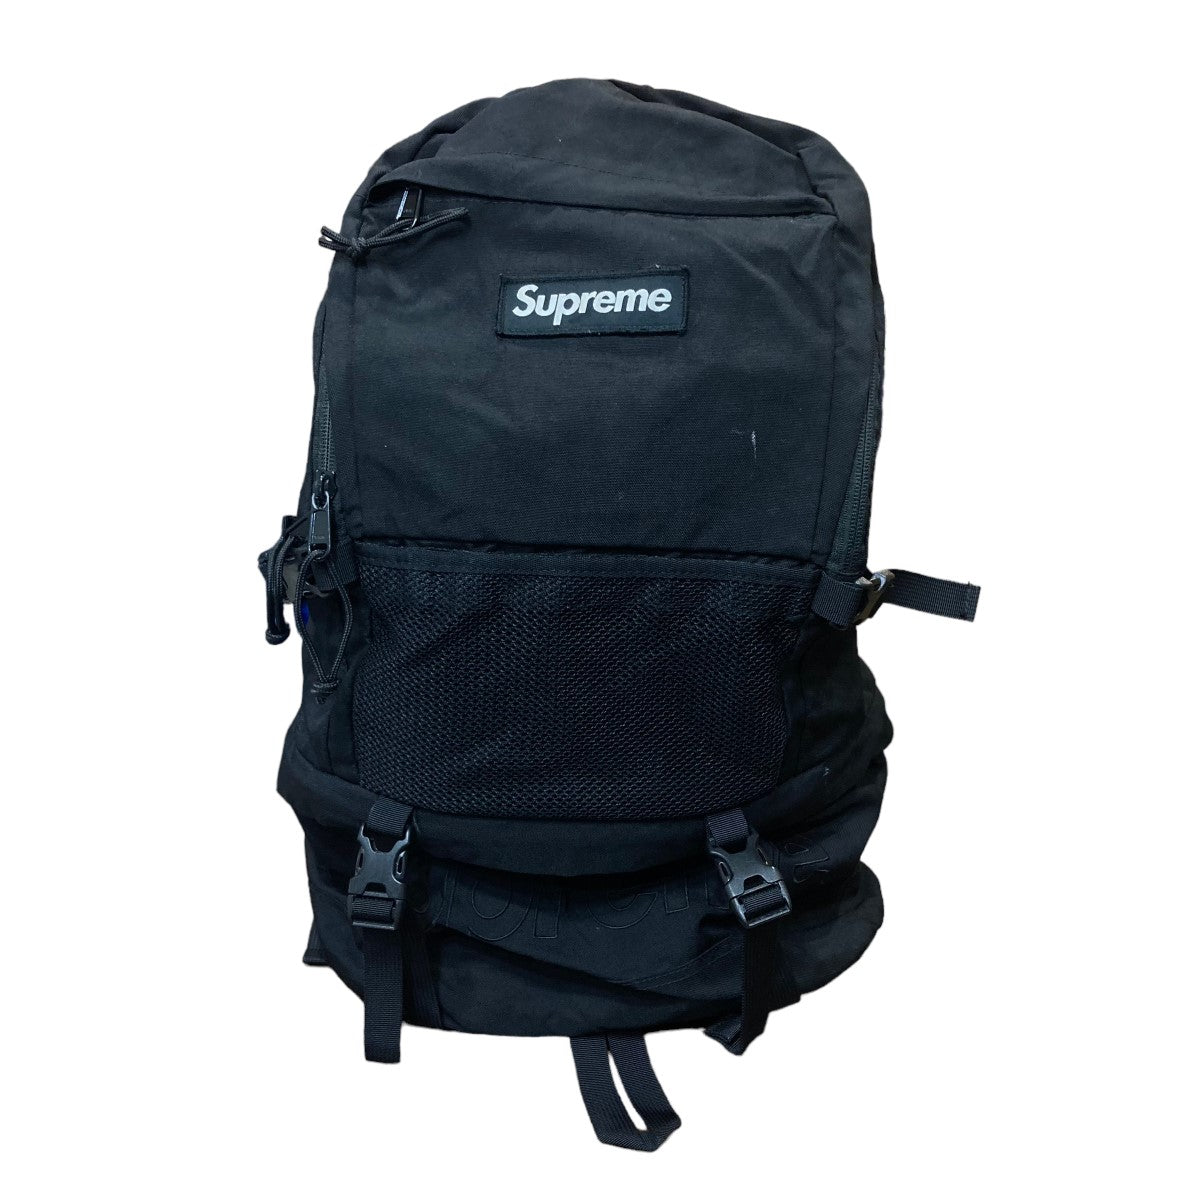 SUPREME(シュプリーム) 15AW「contour backpack」バックパック 